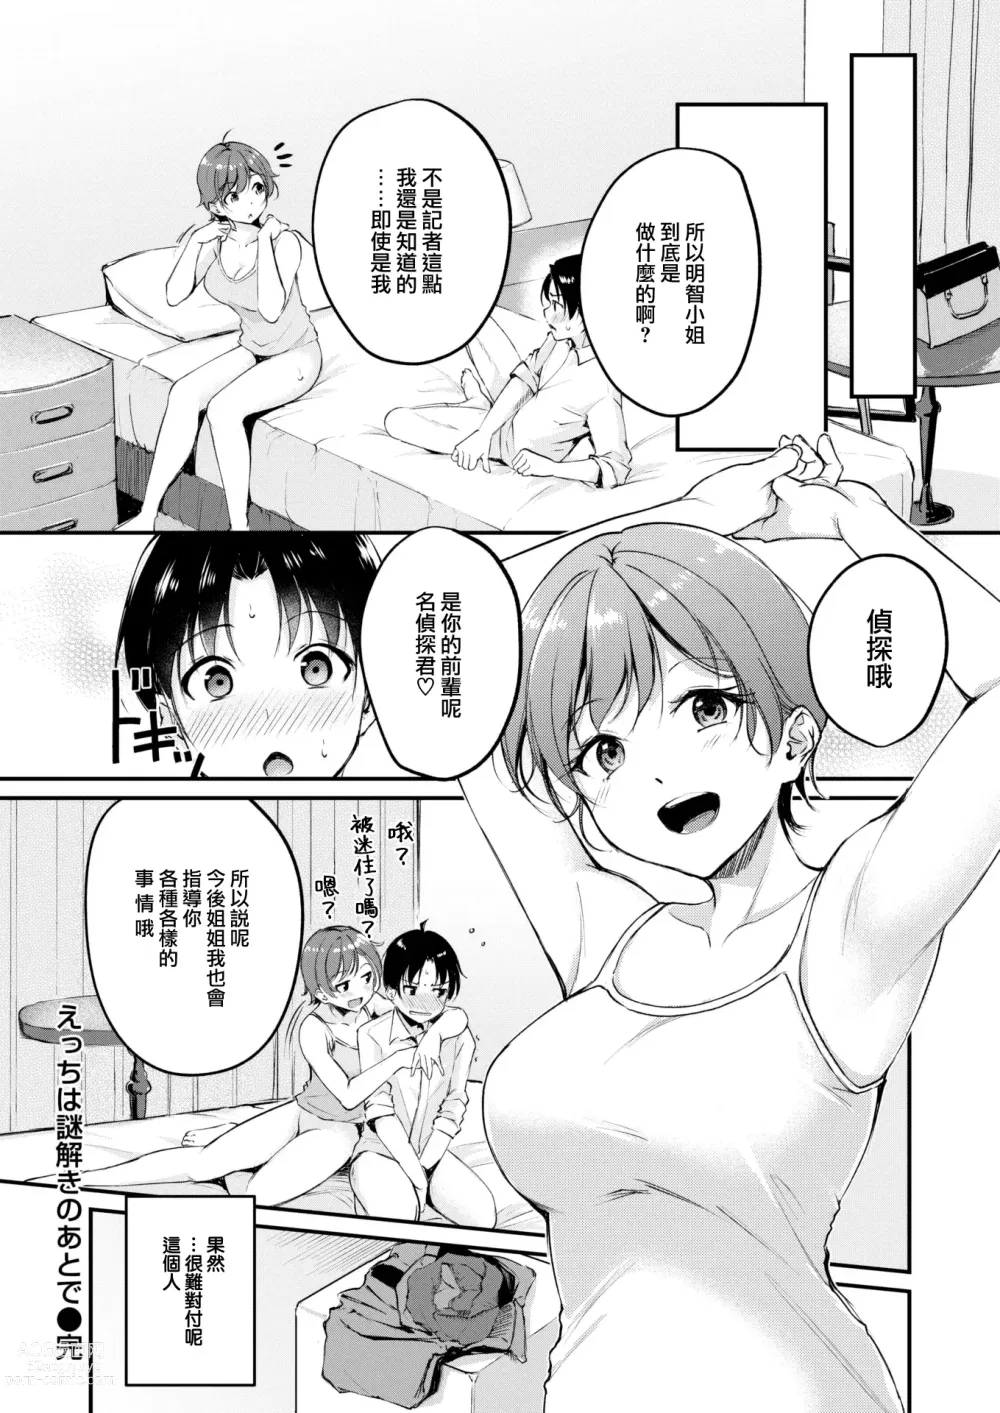 Page 27 of doujinshi えっちは謎解きのあとで